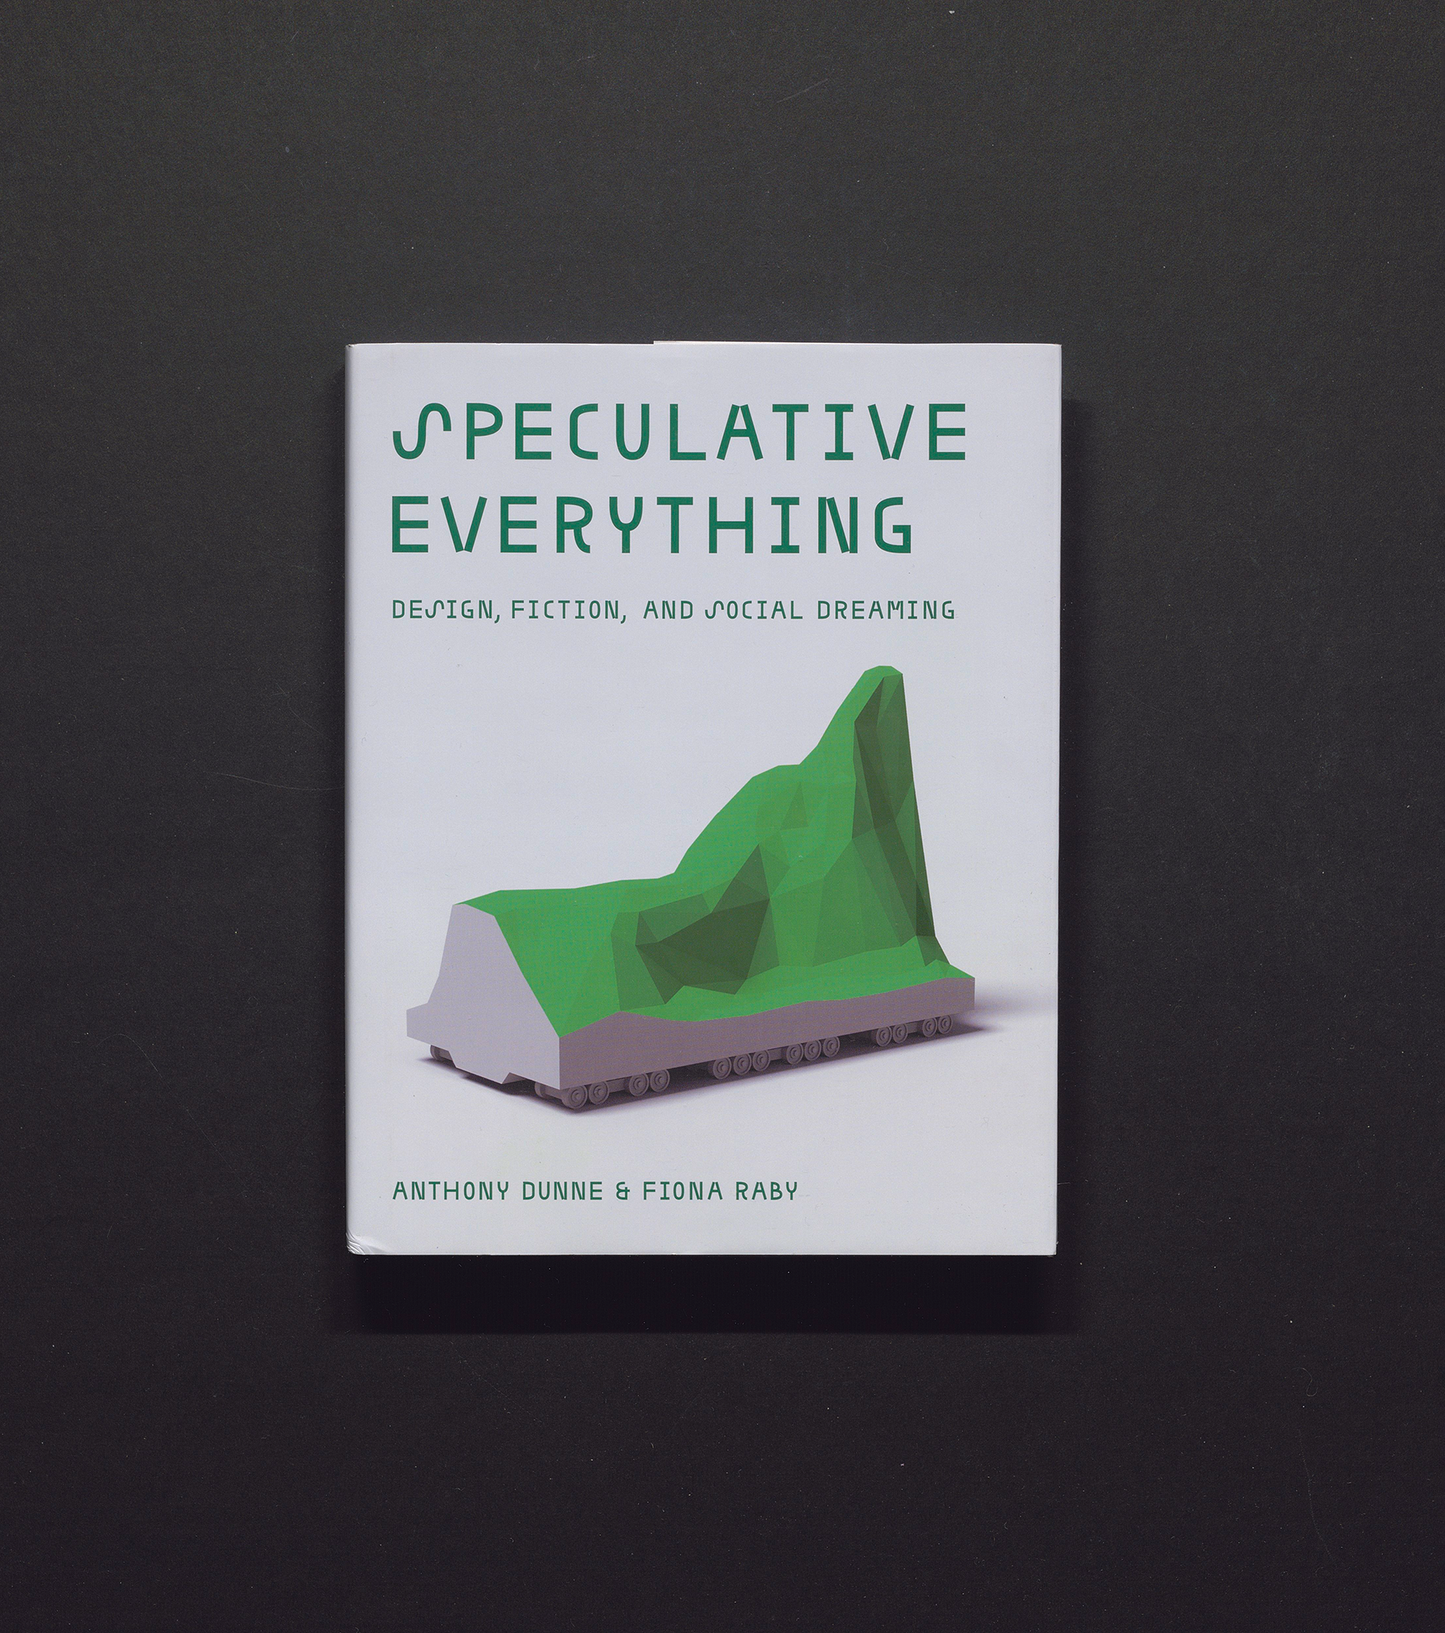 Speculative Everything - Design, Fiction, and Social Dreaming